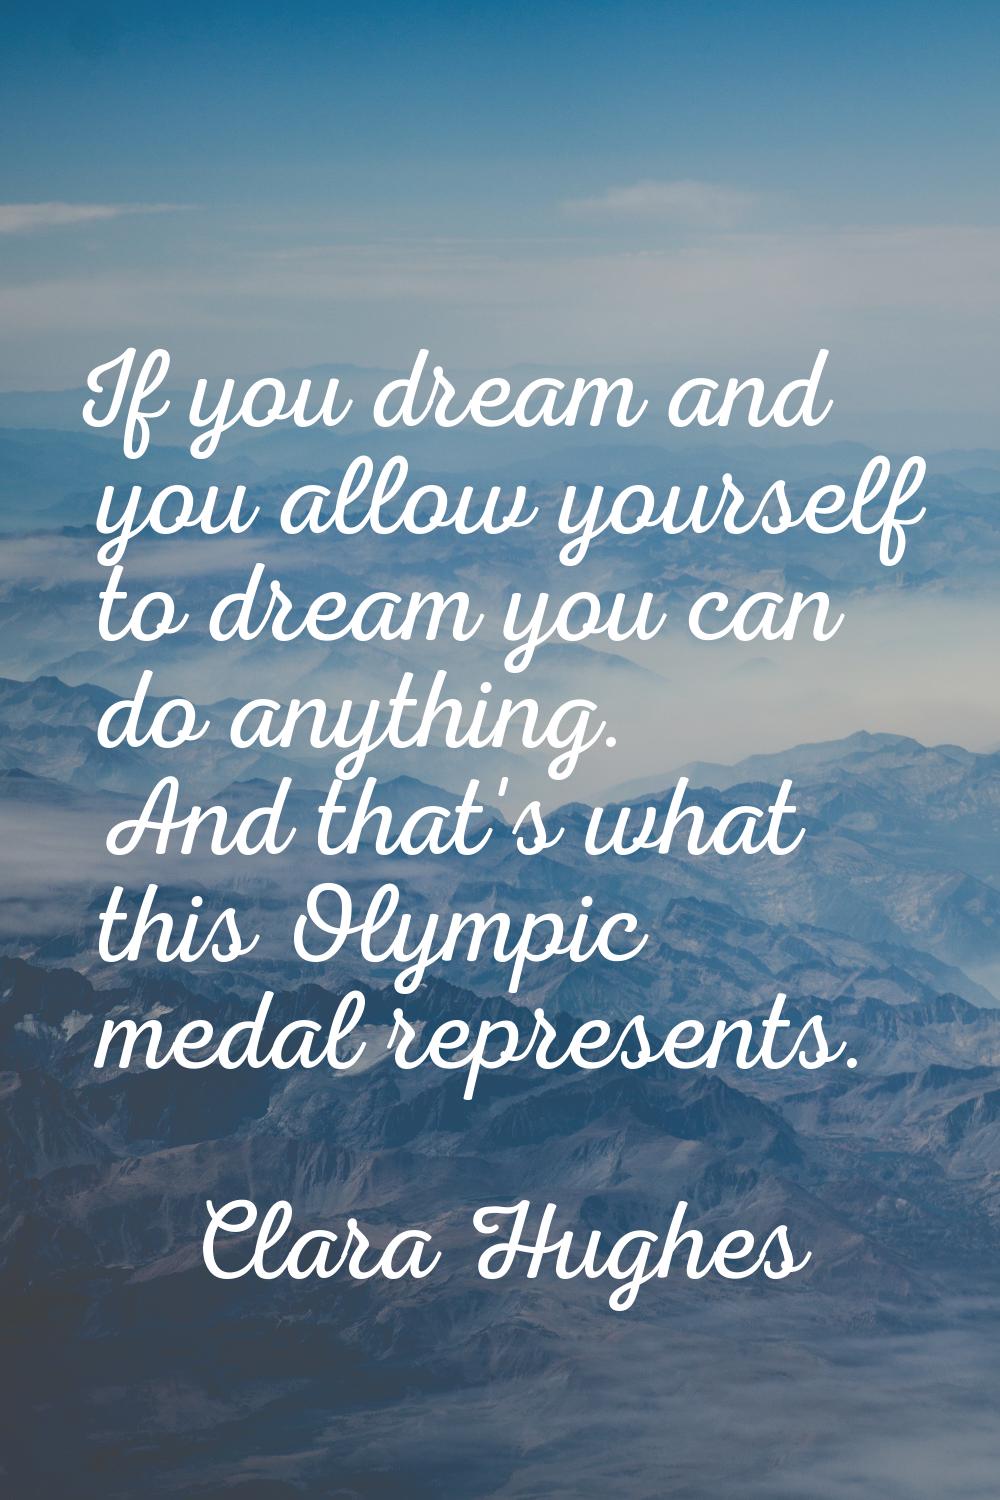 If you dream and you allow yourself to dream you can do anything. And that's what this Olympic meda